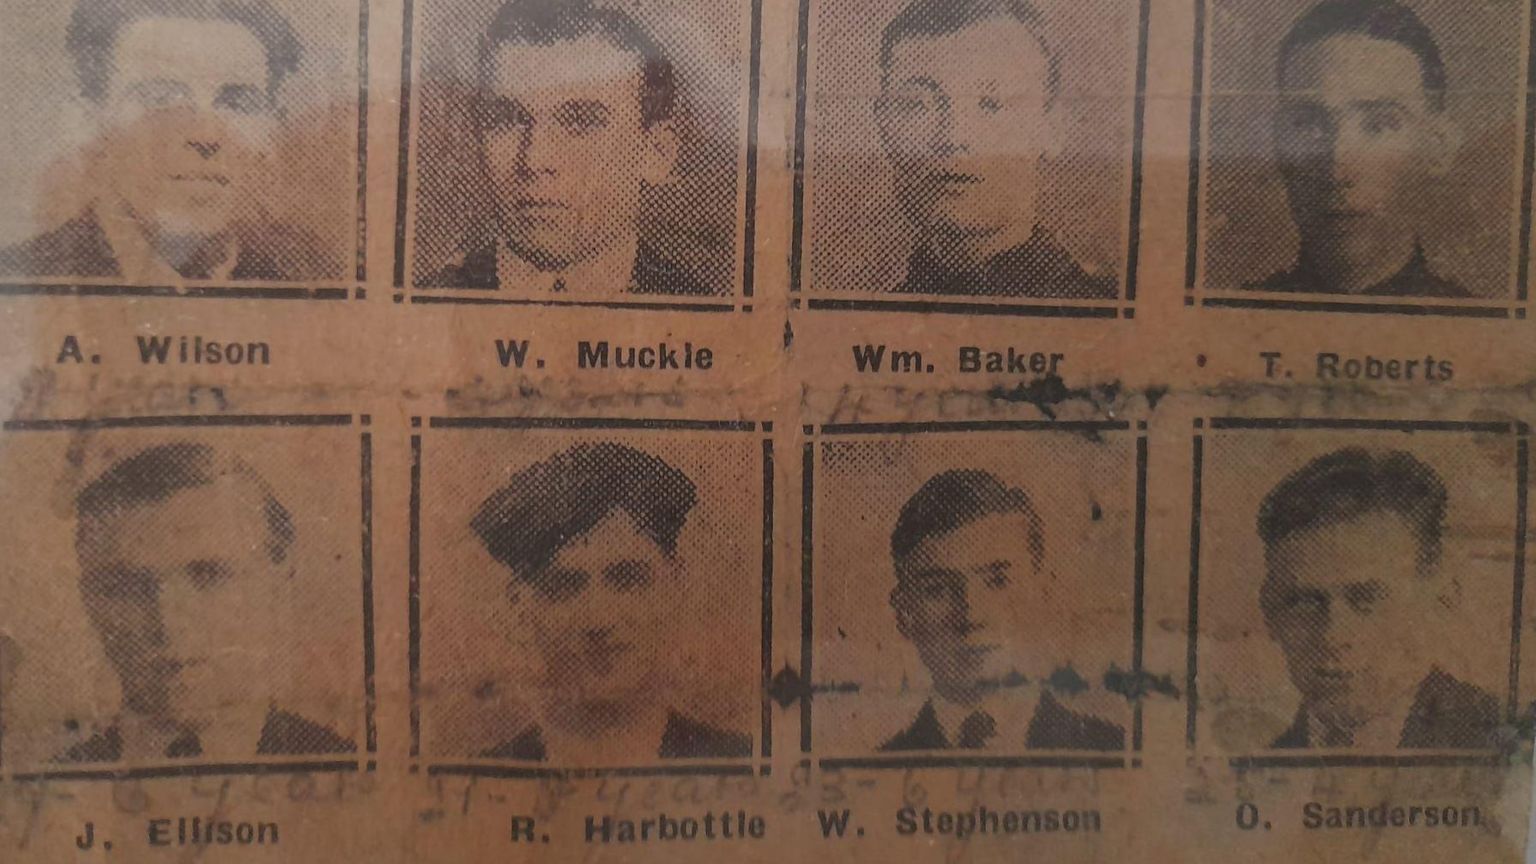 A newspaper cutting showing head shots of the eight miners who were imprisoned following the derailment